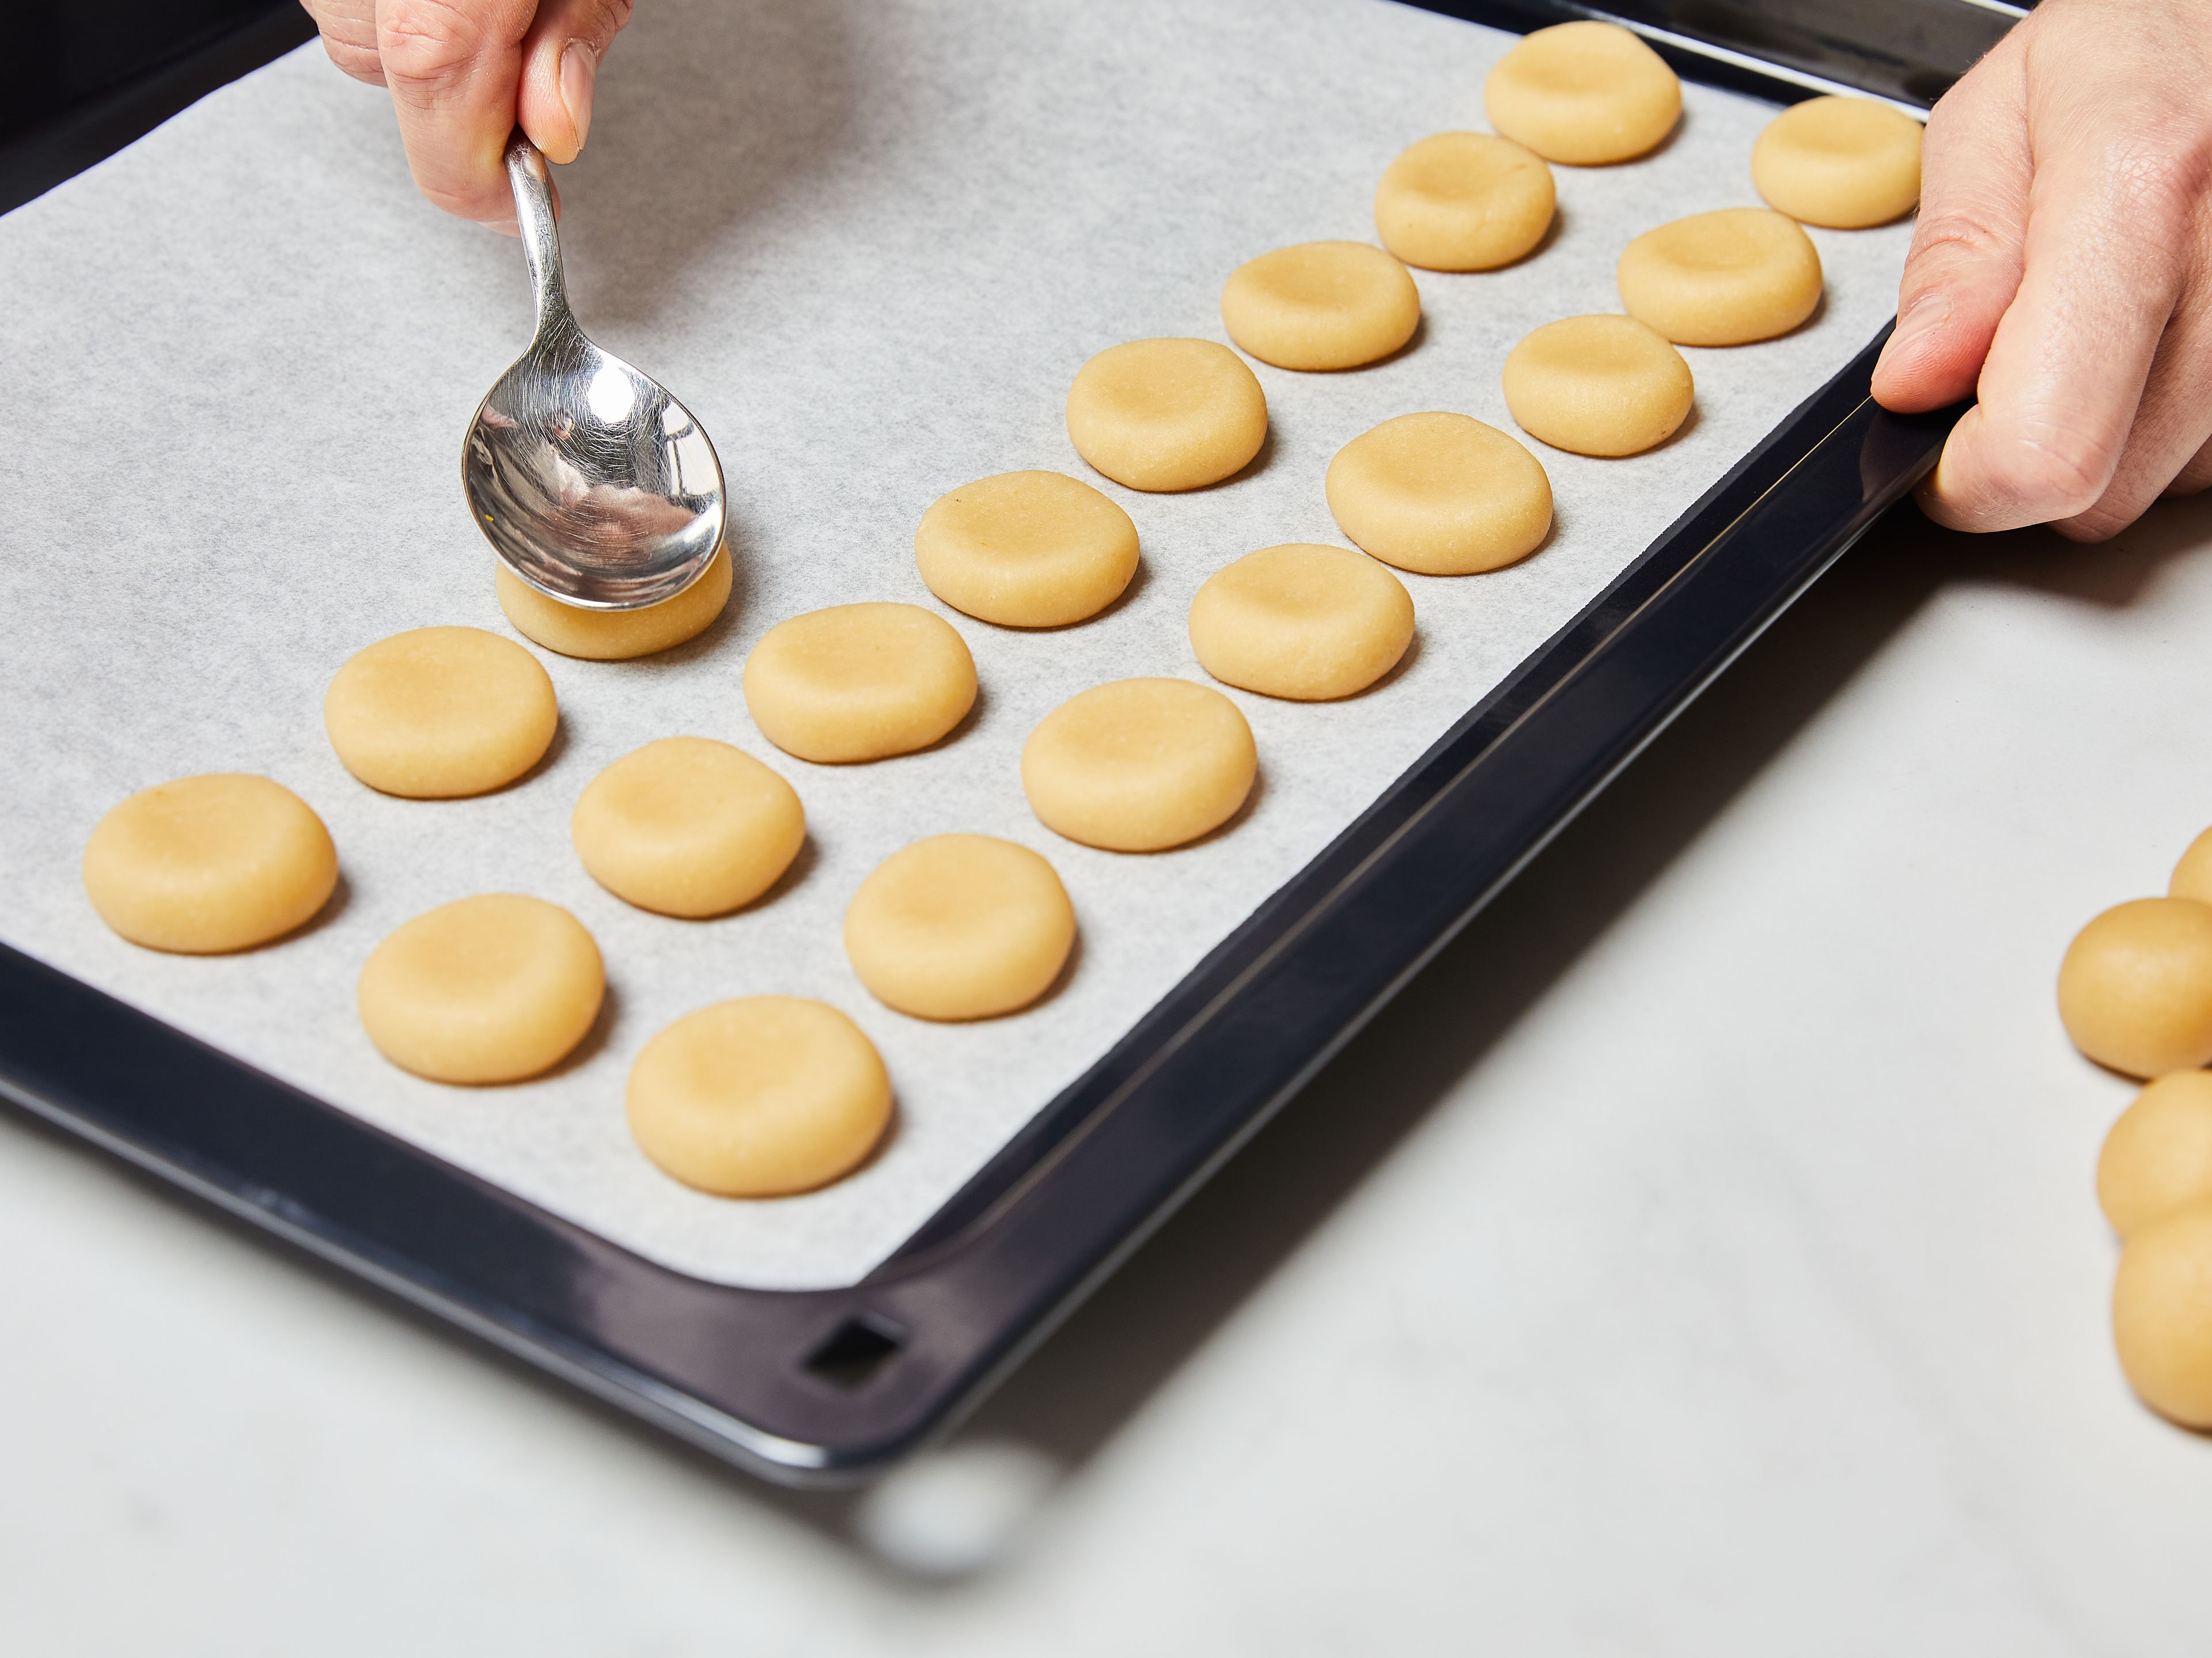 With moistened hands, form small balls. Then place them a little apart on a baking sheet lined with parchment paper. Gently flatten each ball of dough with the back of a spoon or your thumb.